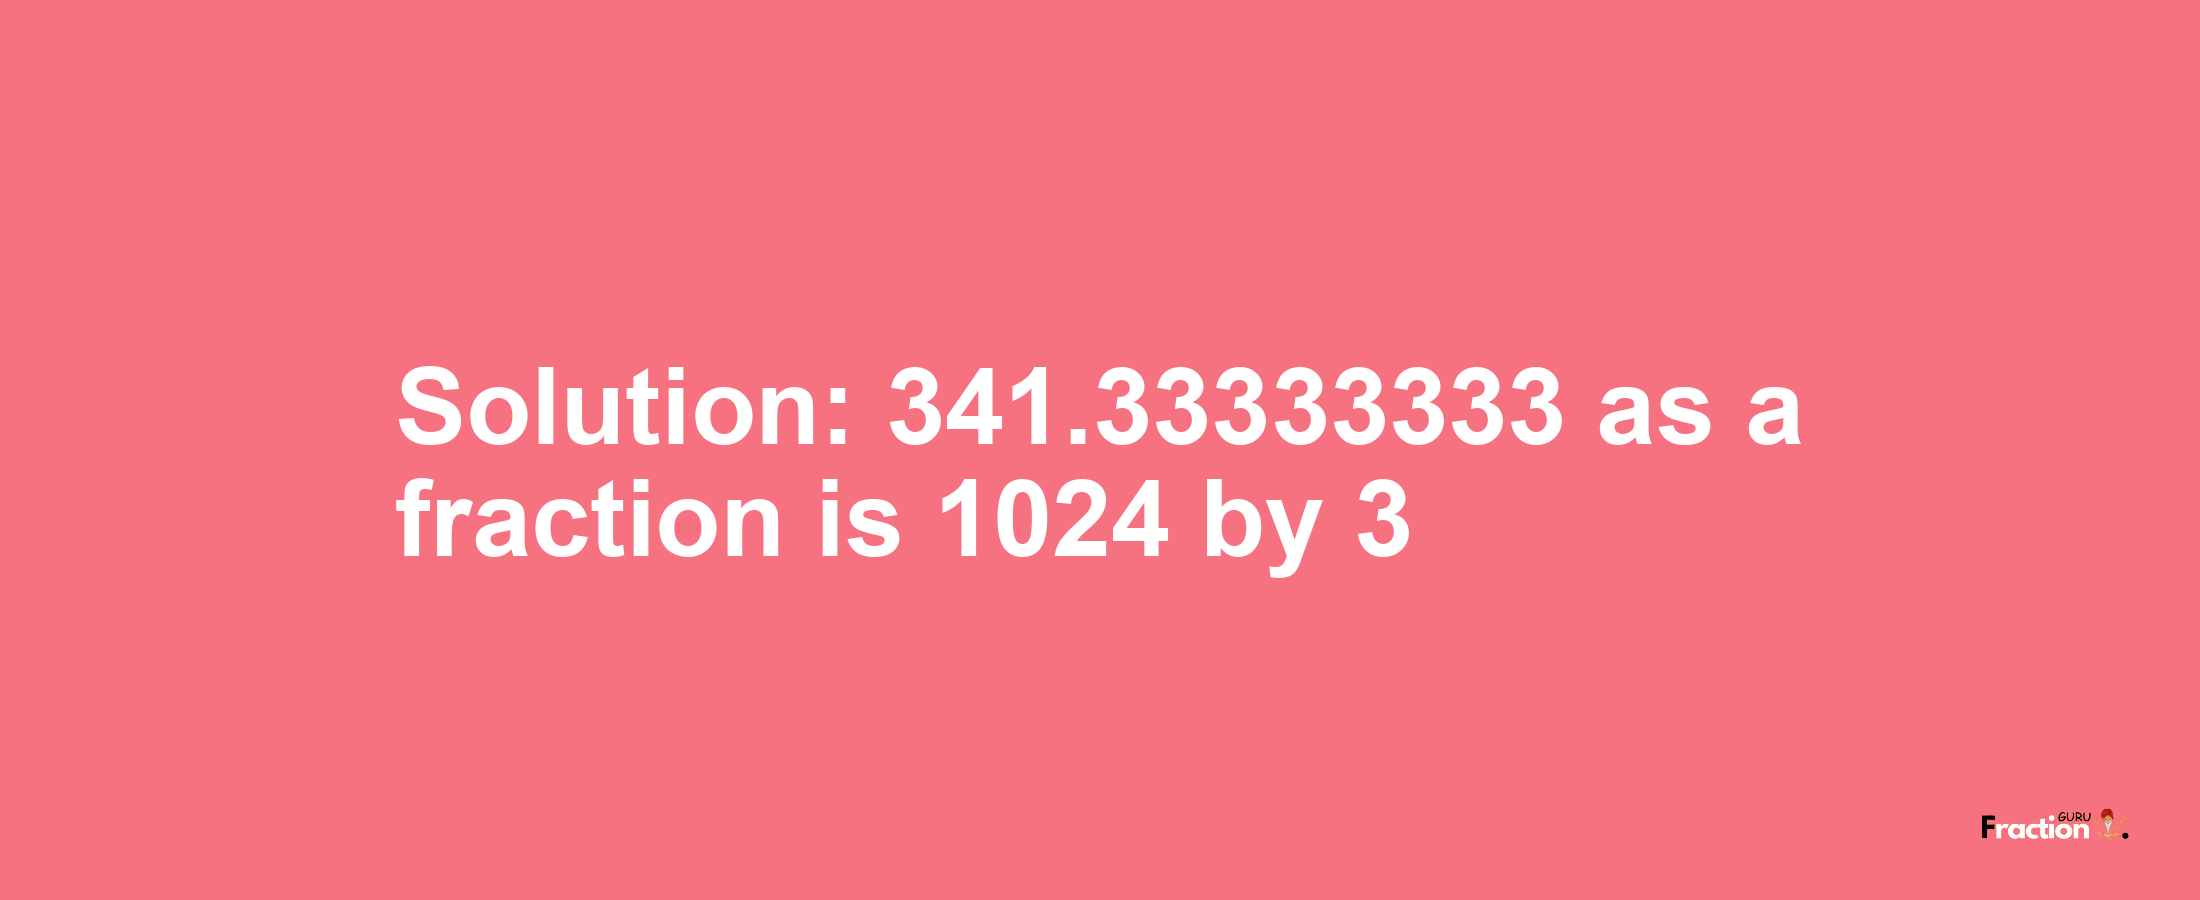 Solution:341.33333333 as a fraction is 1024/3